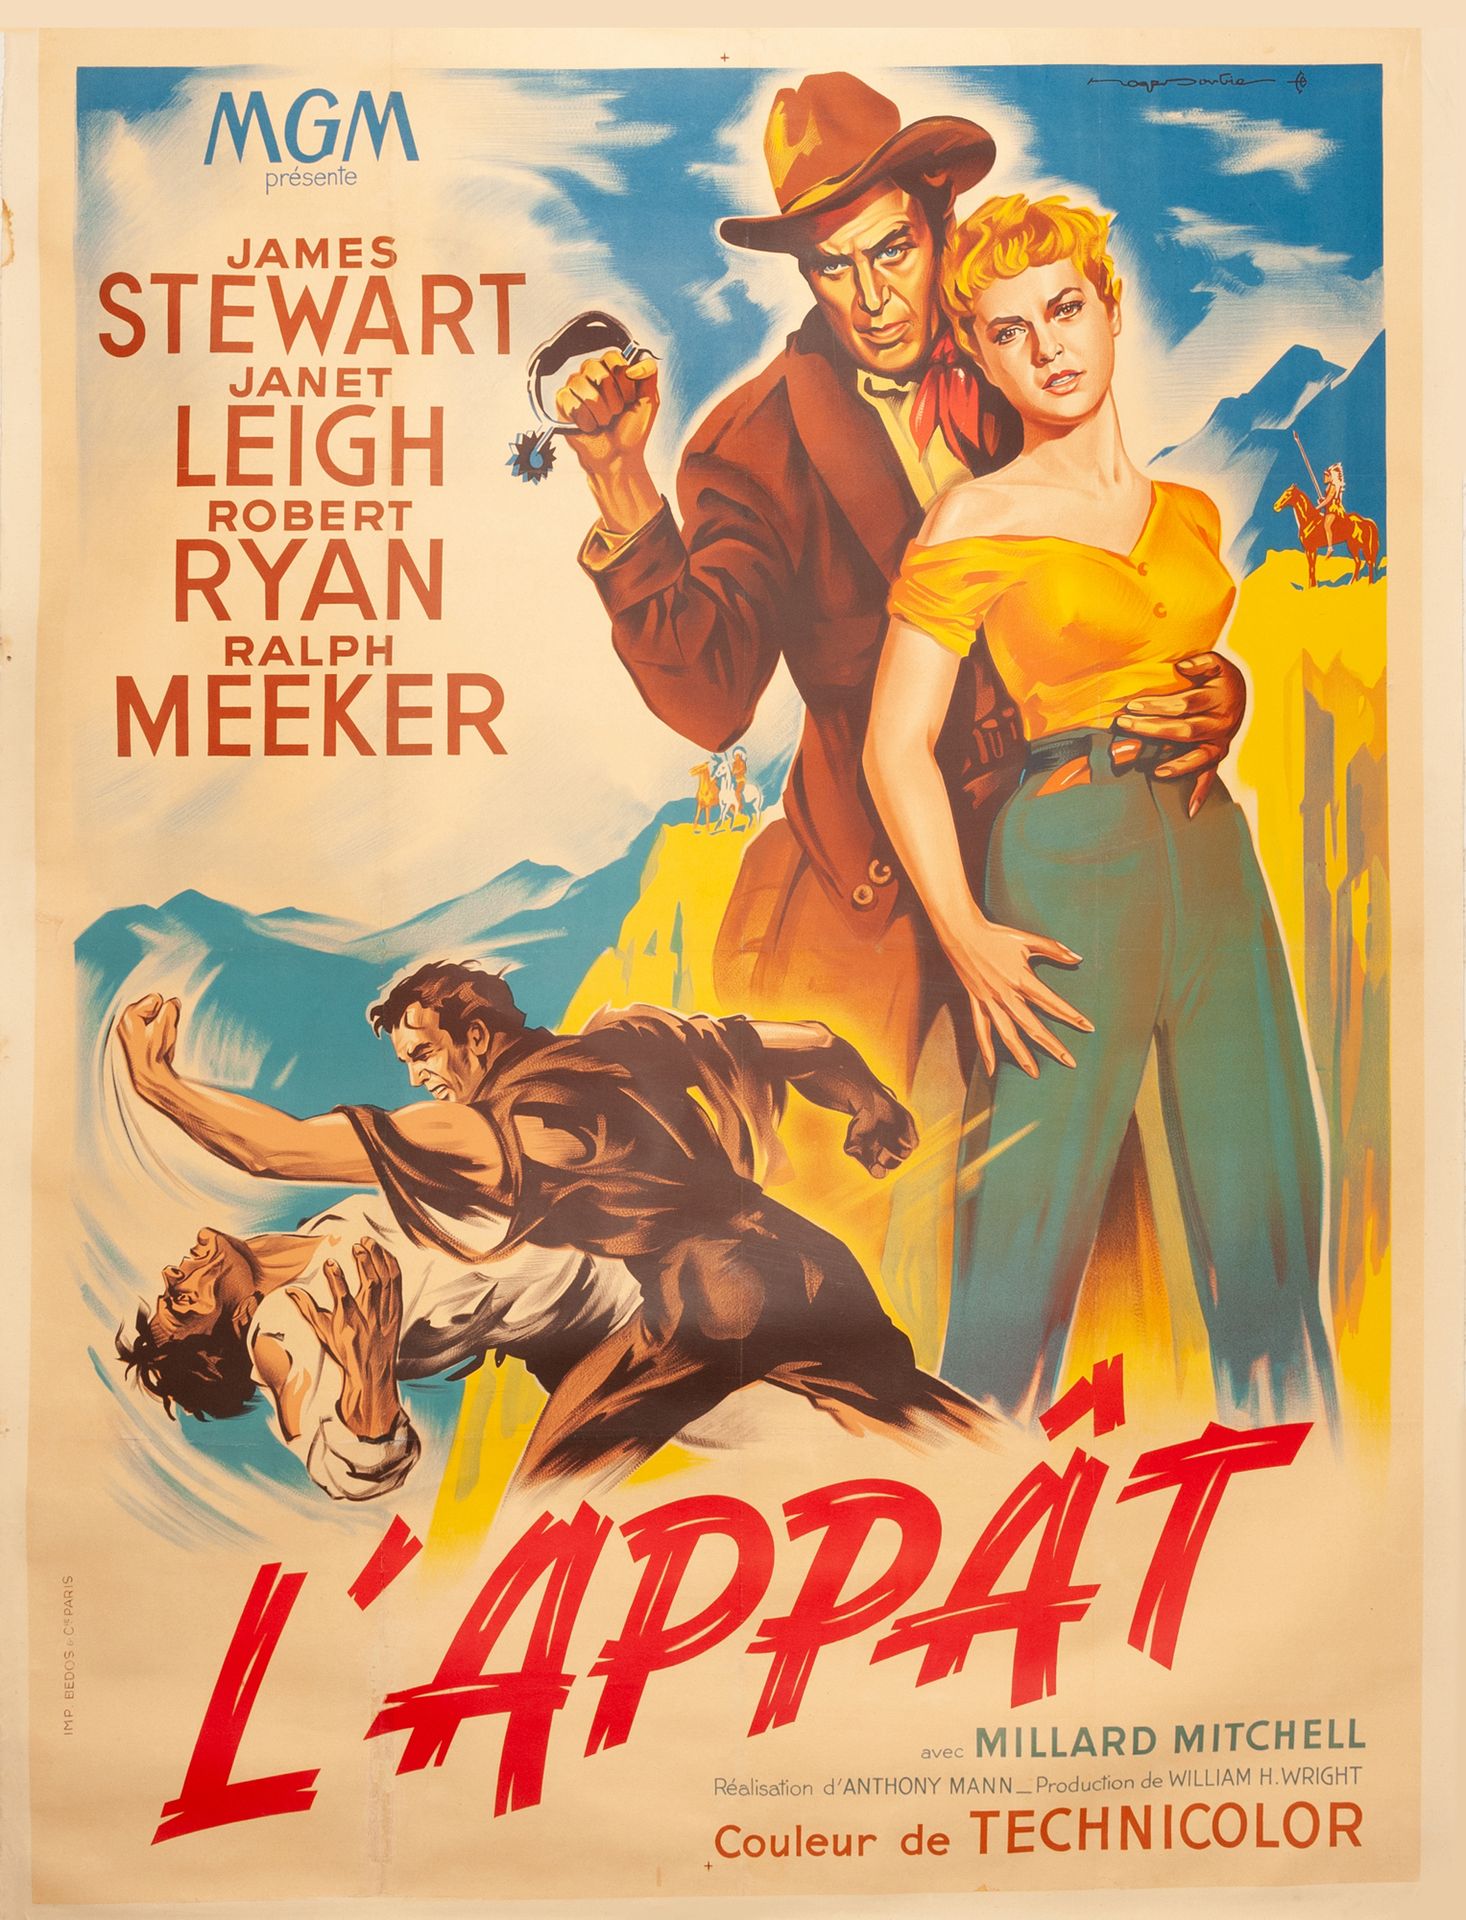 Null L'APPAT / THE NAKED SPUR Anthony Mann. 1953.
120 x 160 cm. Französisches Pl&hellip;